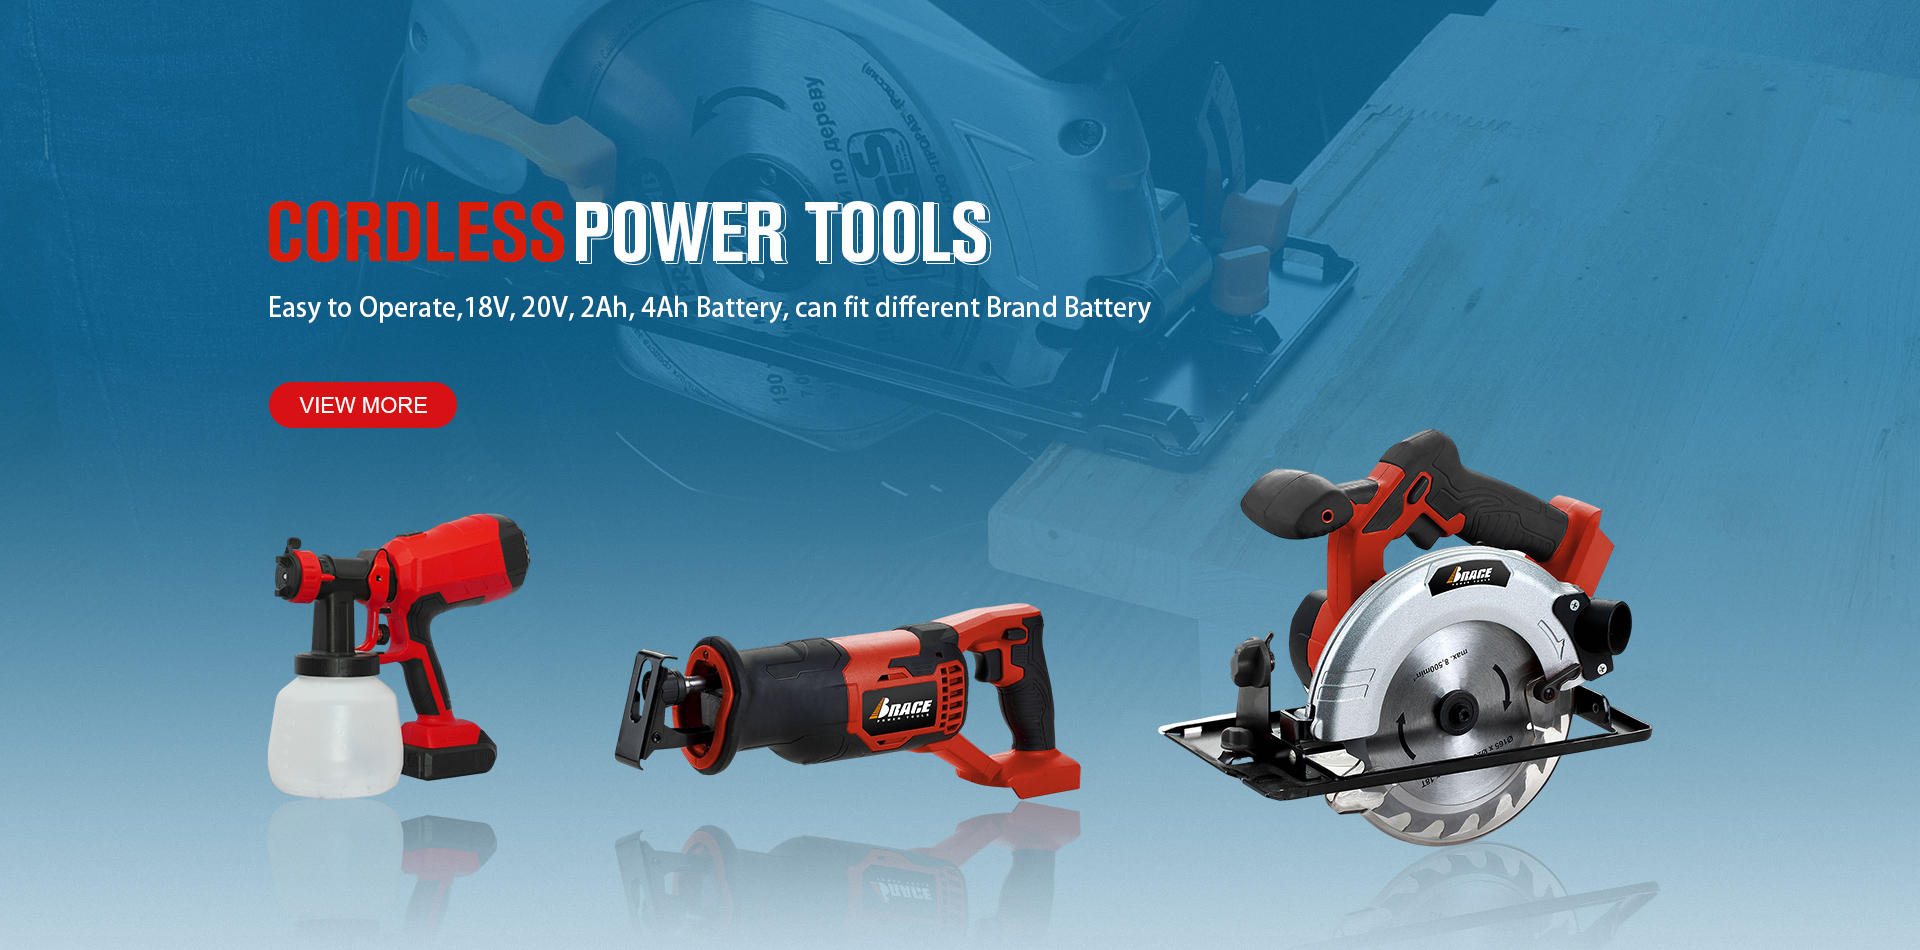 Cordless Power Tools With Different Battery